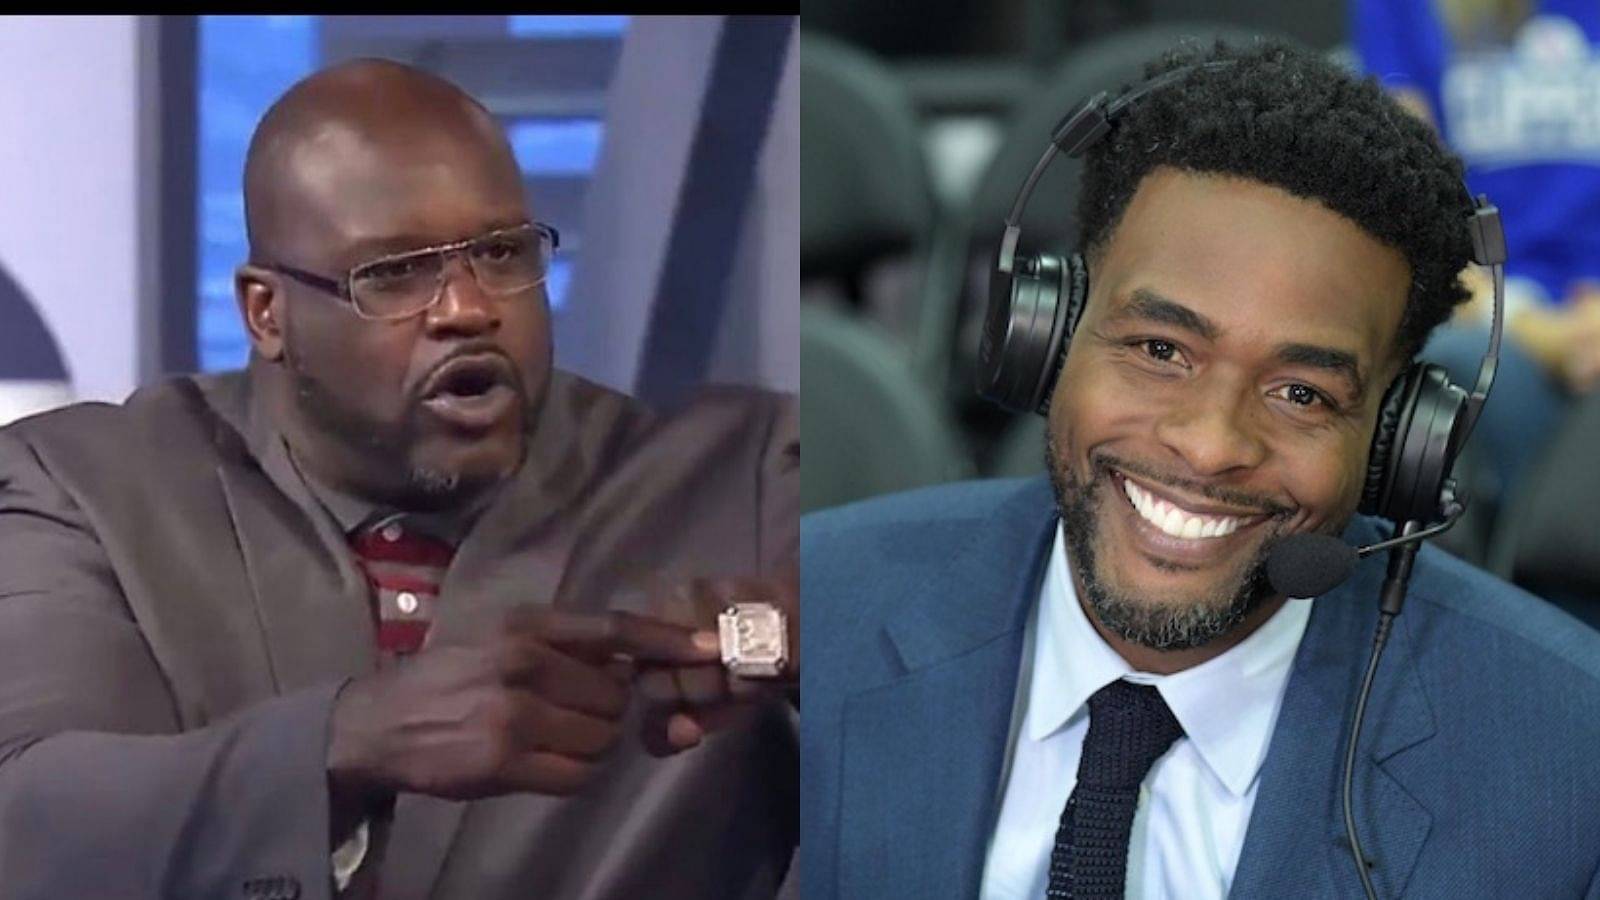 “Shaquille O’Neal got Chris Webber’s spot just because he was a better legend”: NBA Twitter discusses The Diesel replacing C-Web on Inside the NBA eleven years later - The SportsRush